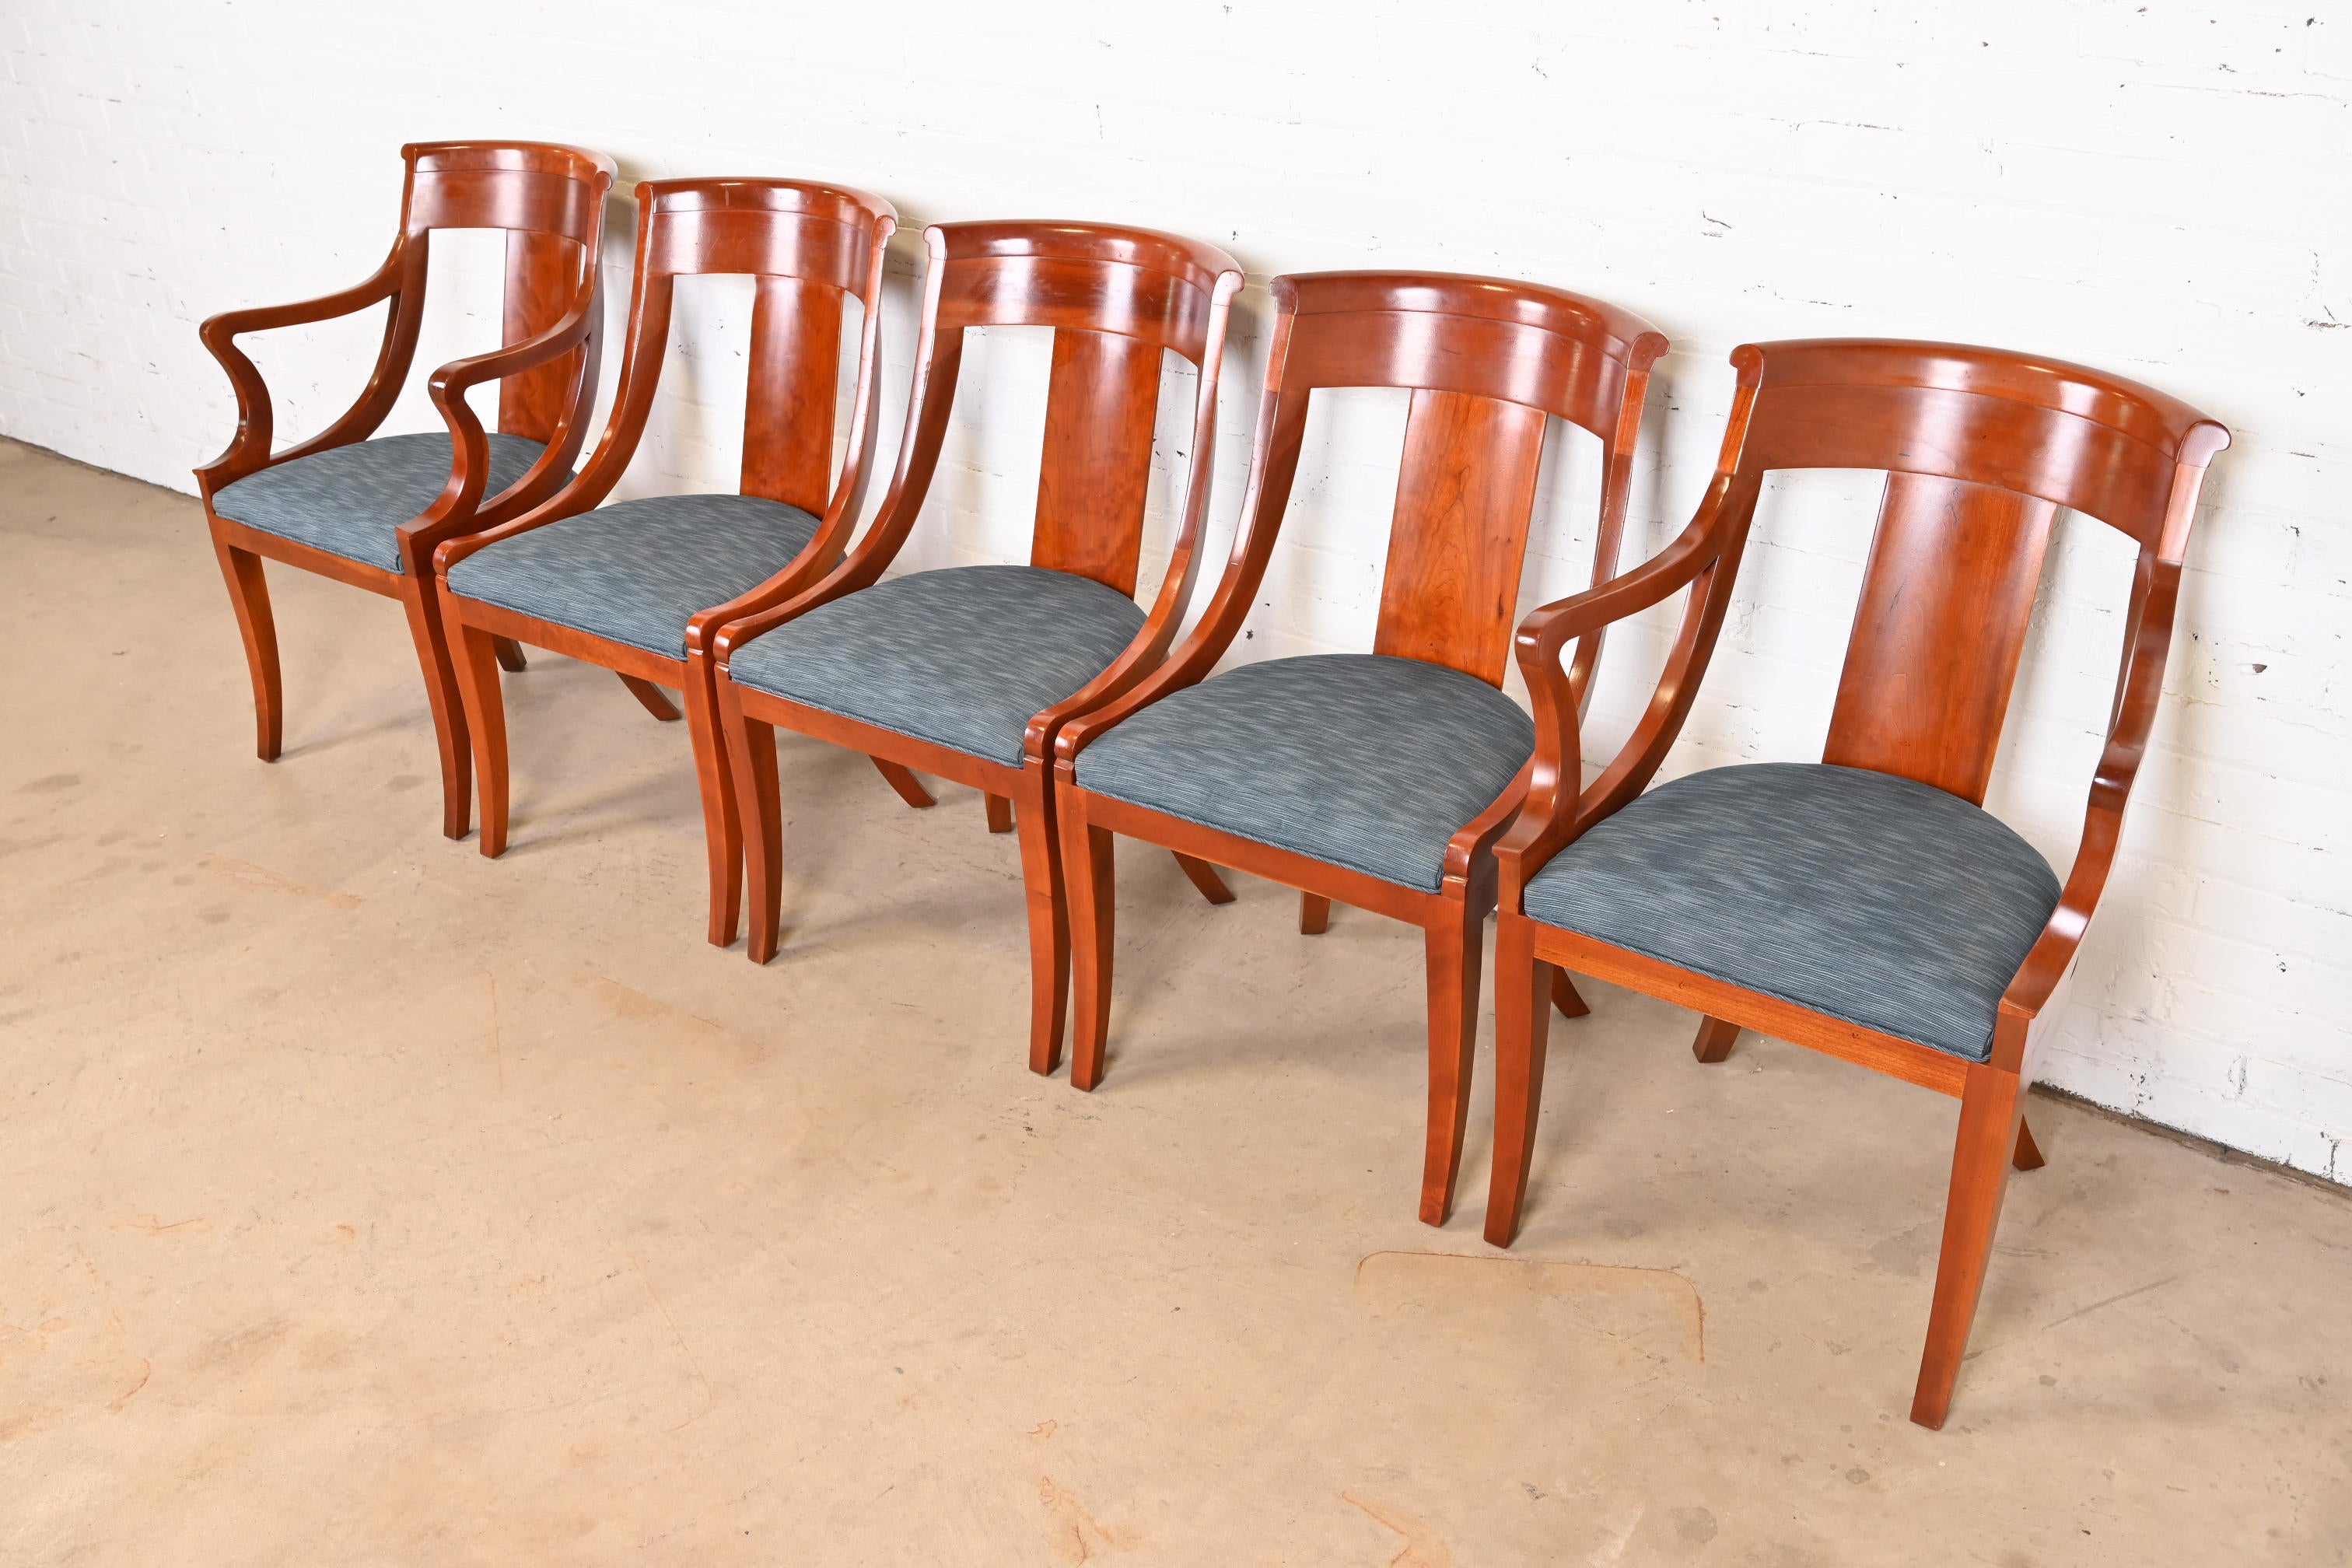 A beautiful set of five Regency or Neoclassical style dining chairs

By Baker Furniture

USA, Circa 1980s

Solid cherry wood frames, with upholstered seats.

Measures:
Side chairs - 20.5